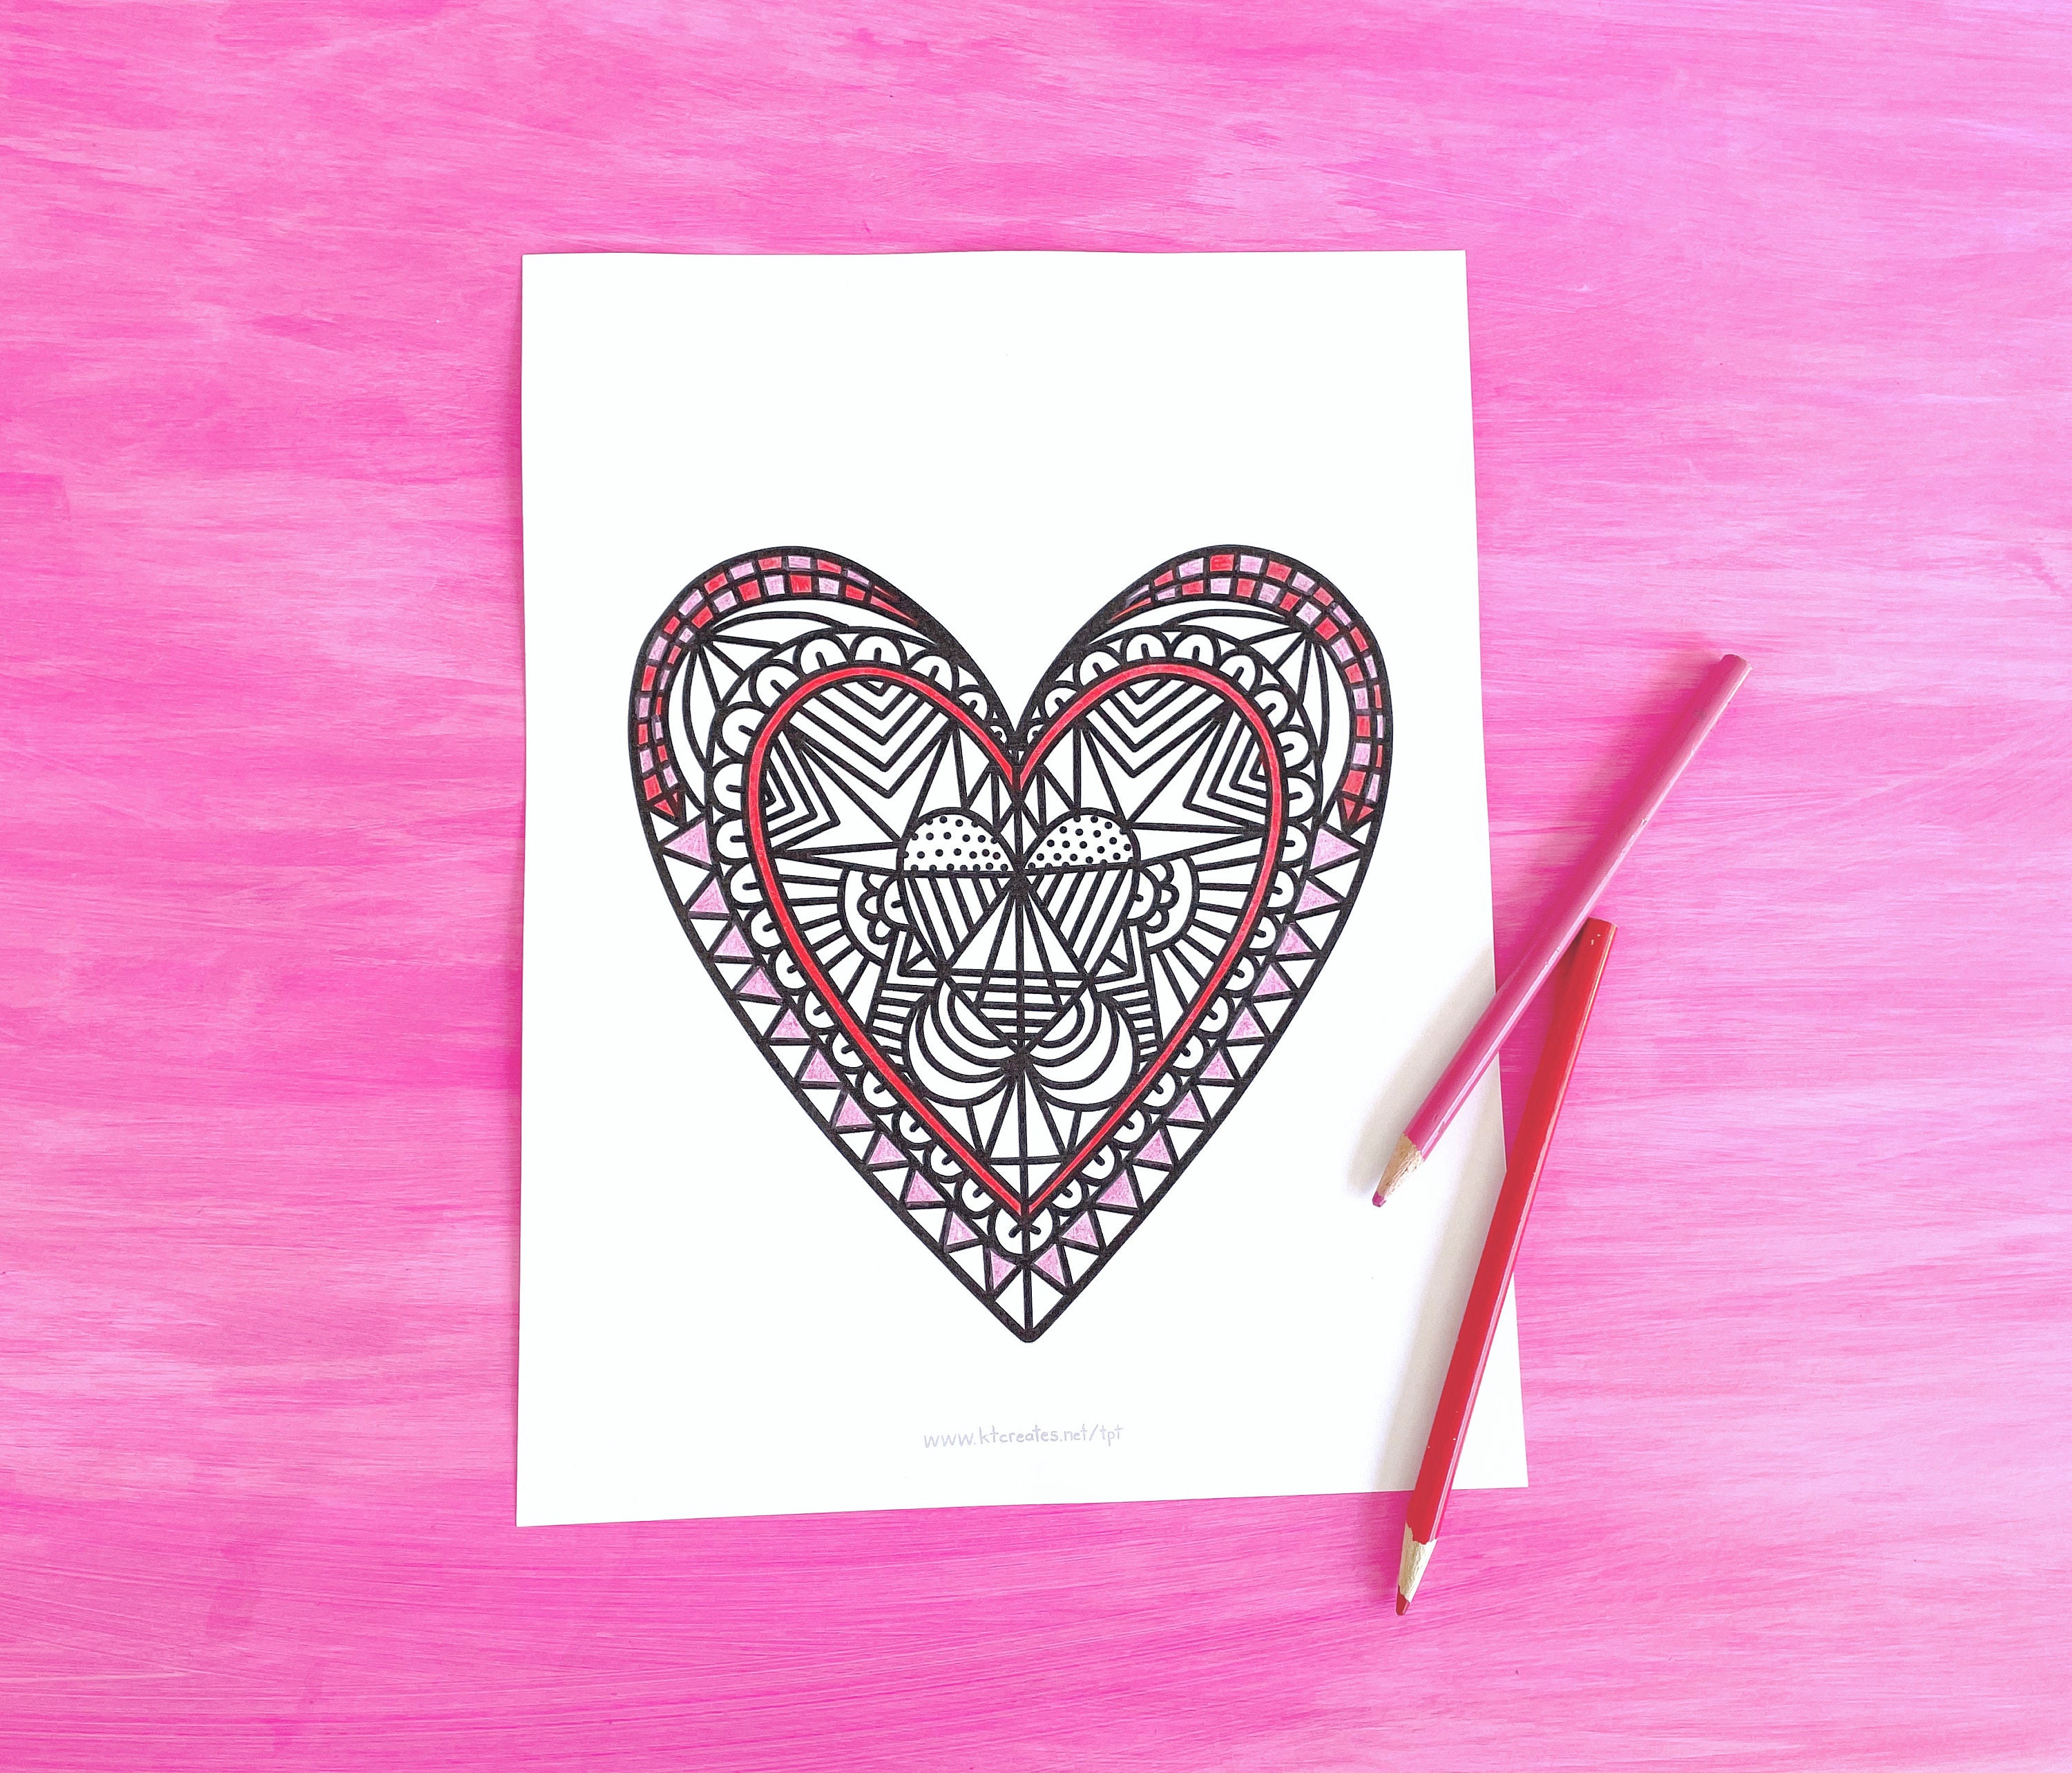 Download Valentines Day Heart Mandala Coloring Page | Etsy